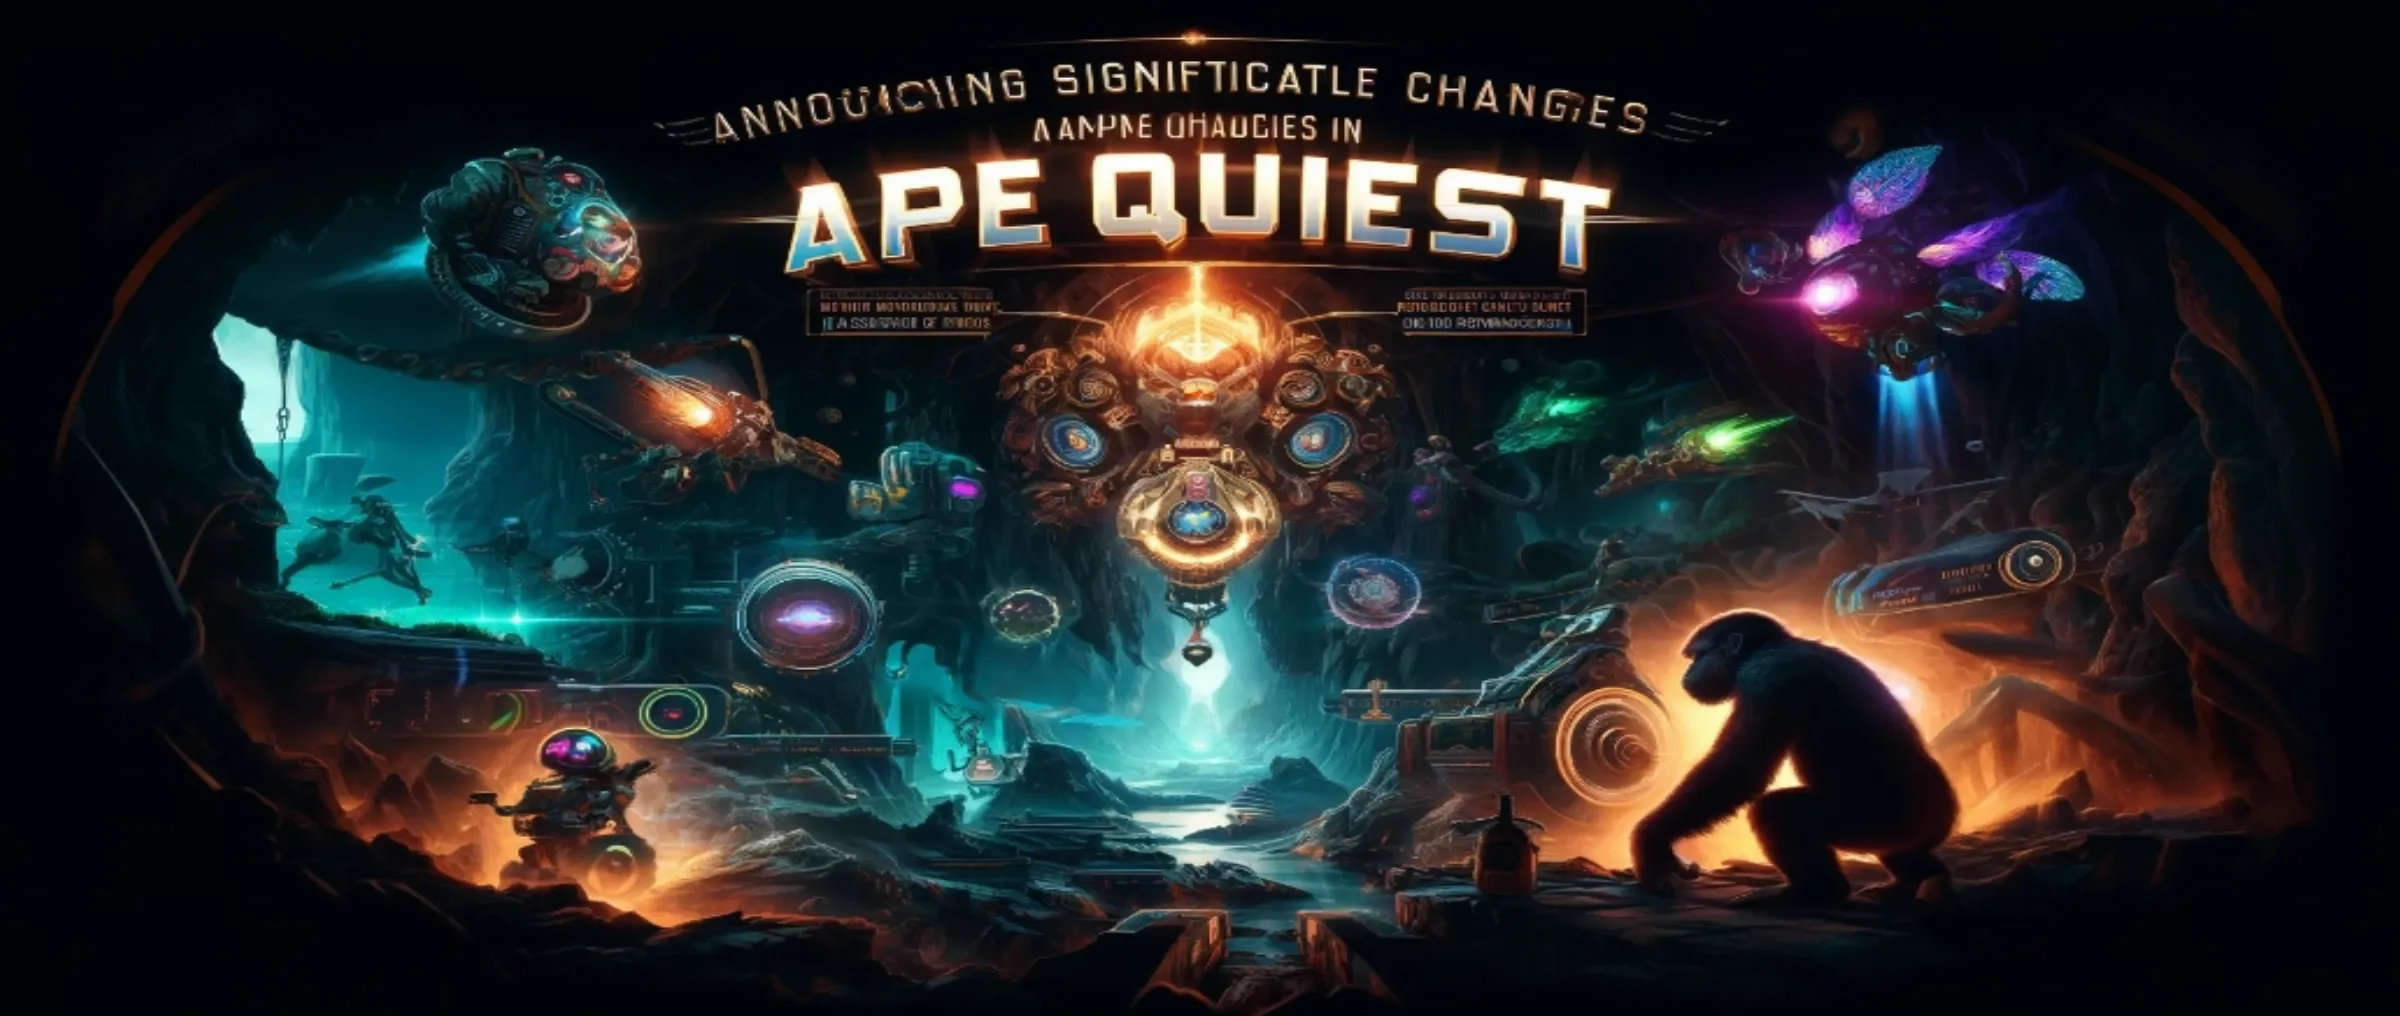 Mines of Dalarnia Announce Significant Changes to Ape Quest